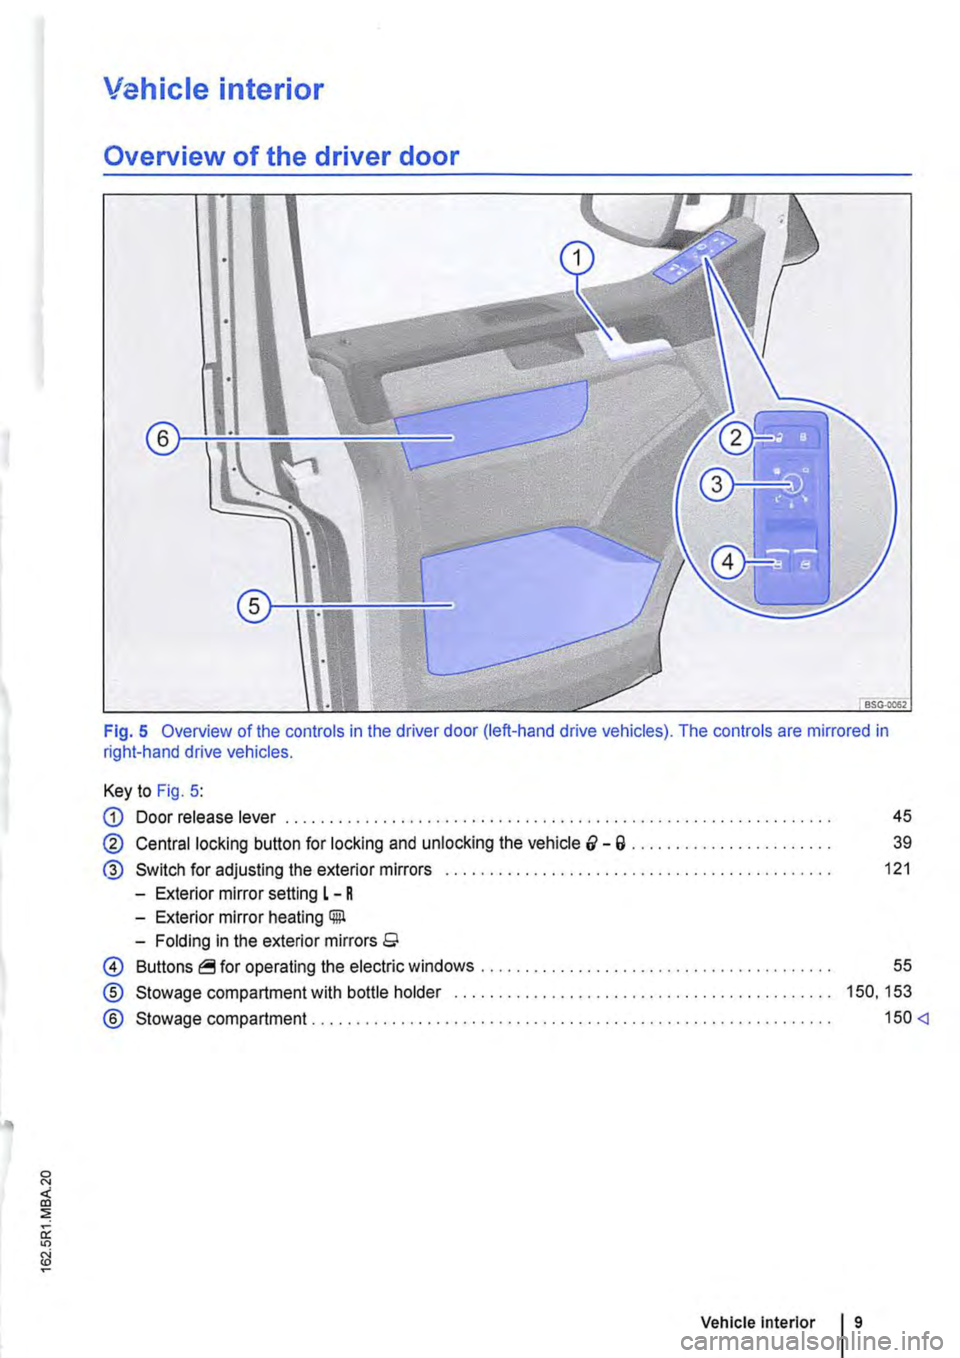 VOLKSWAGEN TRANSPORTER 2012  Owners Manual Vehicle interior 
Overview of the driver door 
Fig. 5 Overview of the controls in the driver door (left-hand drive vehicles). The controls are mirrored in right-hand drive vehicles. 
Key to Fig. 5: 
G